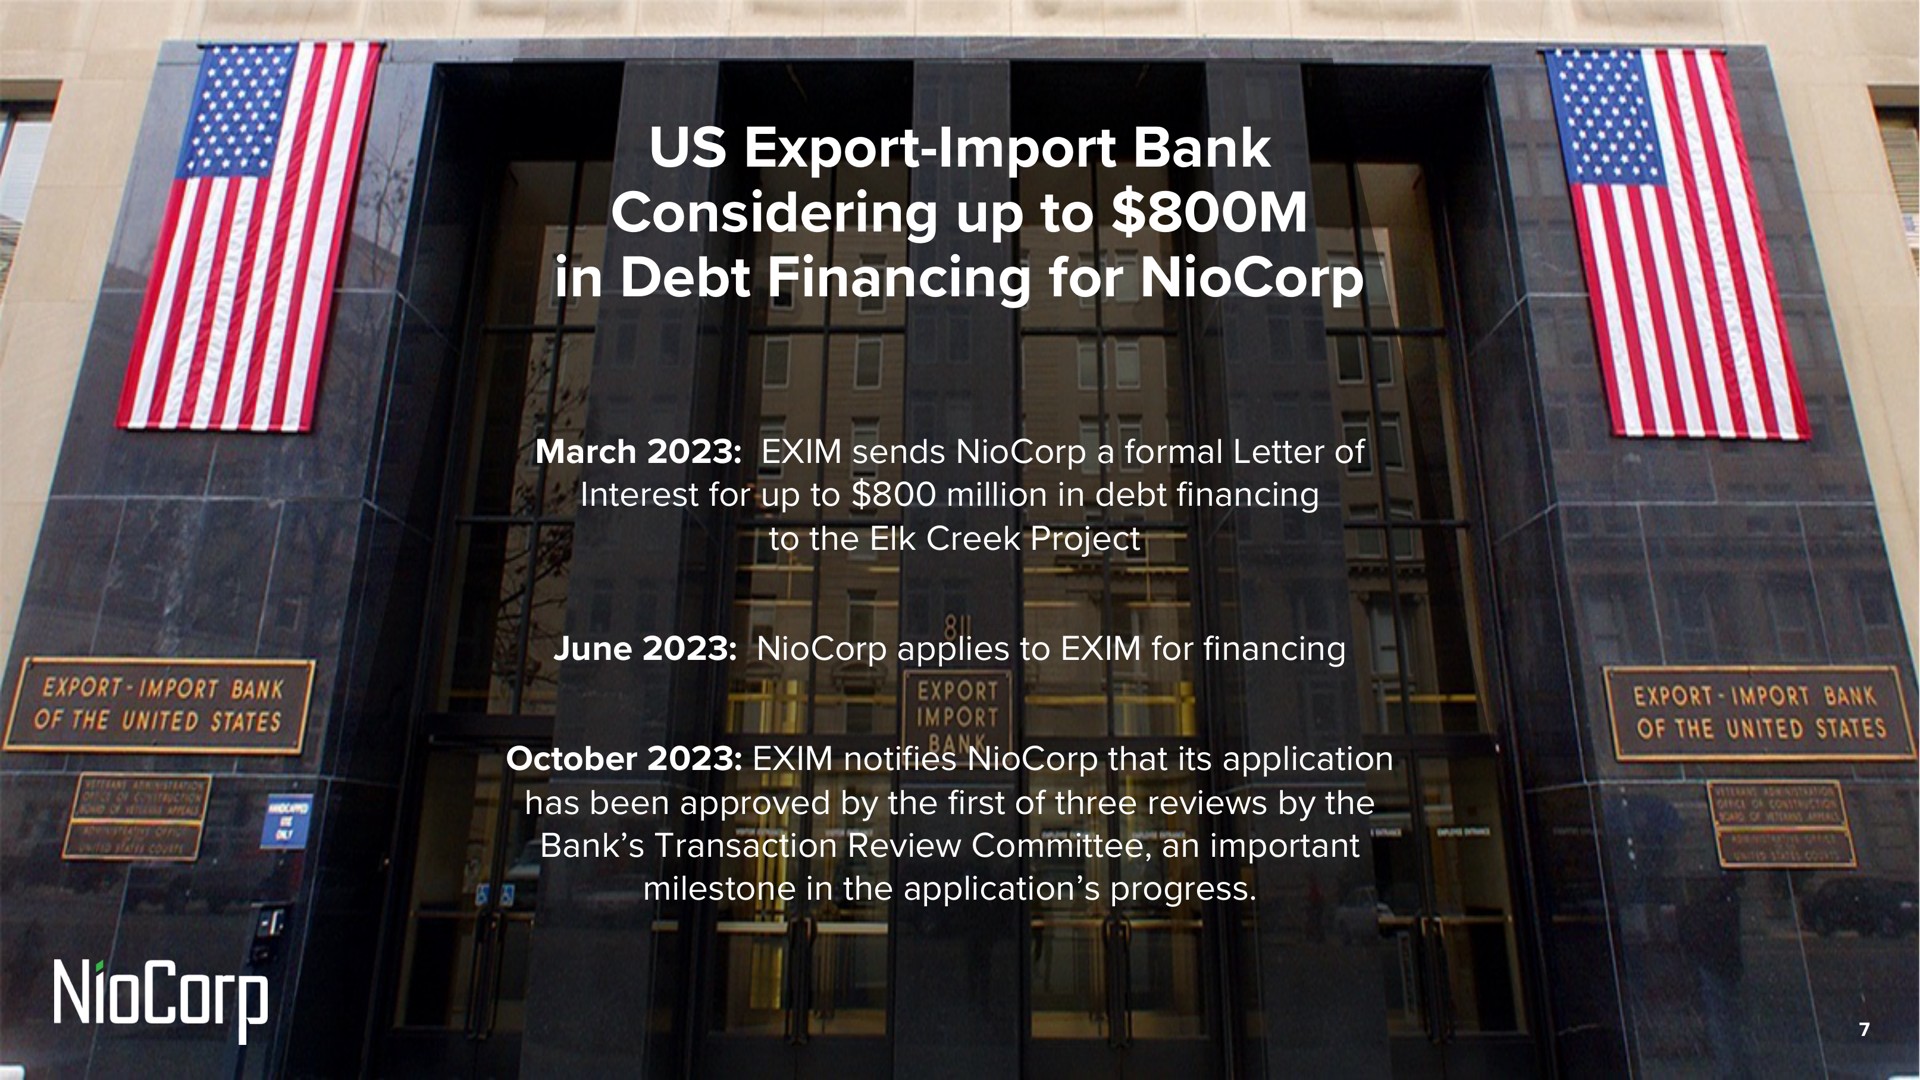 us export import bank considering up to in debt financing for march sends a formal letter of interest for up to million in debt financing to the elk creek project june applies to for financing notifies that its application has been approved by the first of three reviews by the bank transaction review committee an important milestone in the application progress came iss | NioCorp